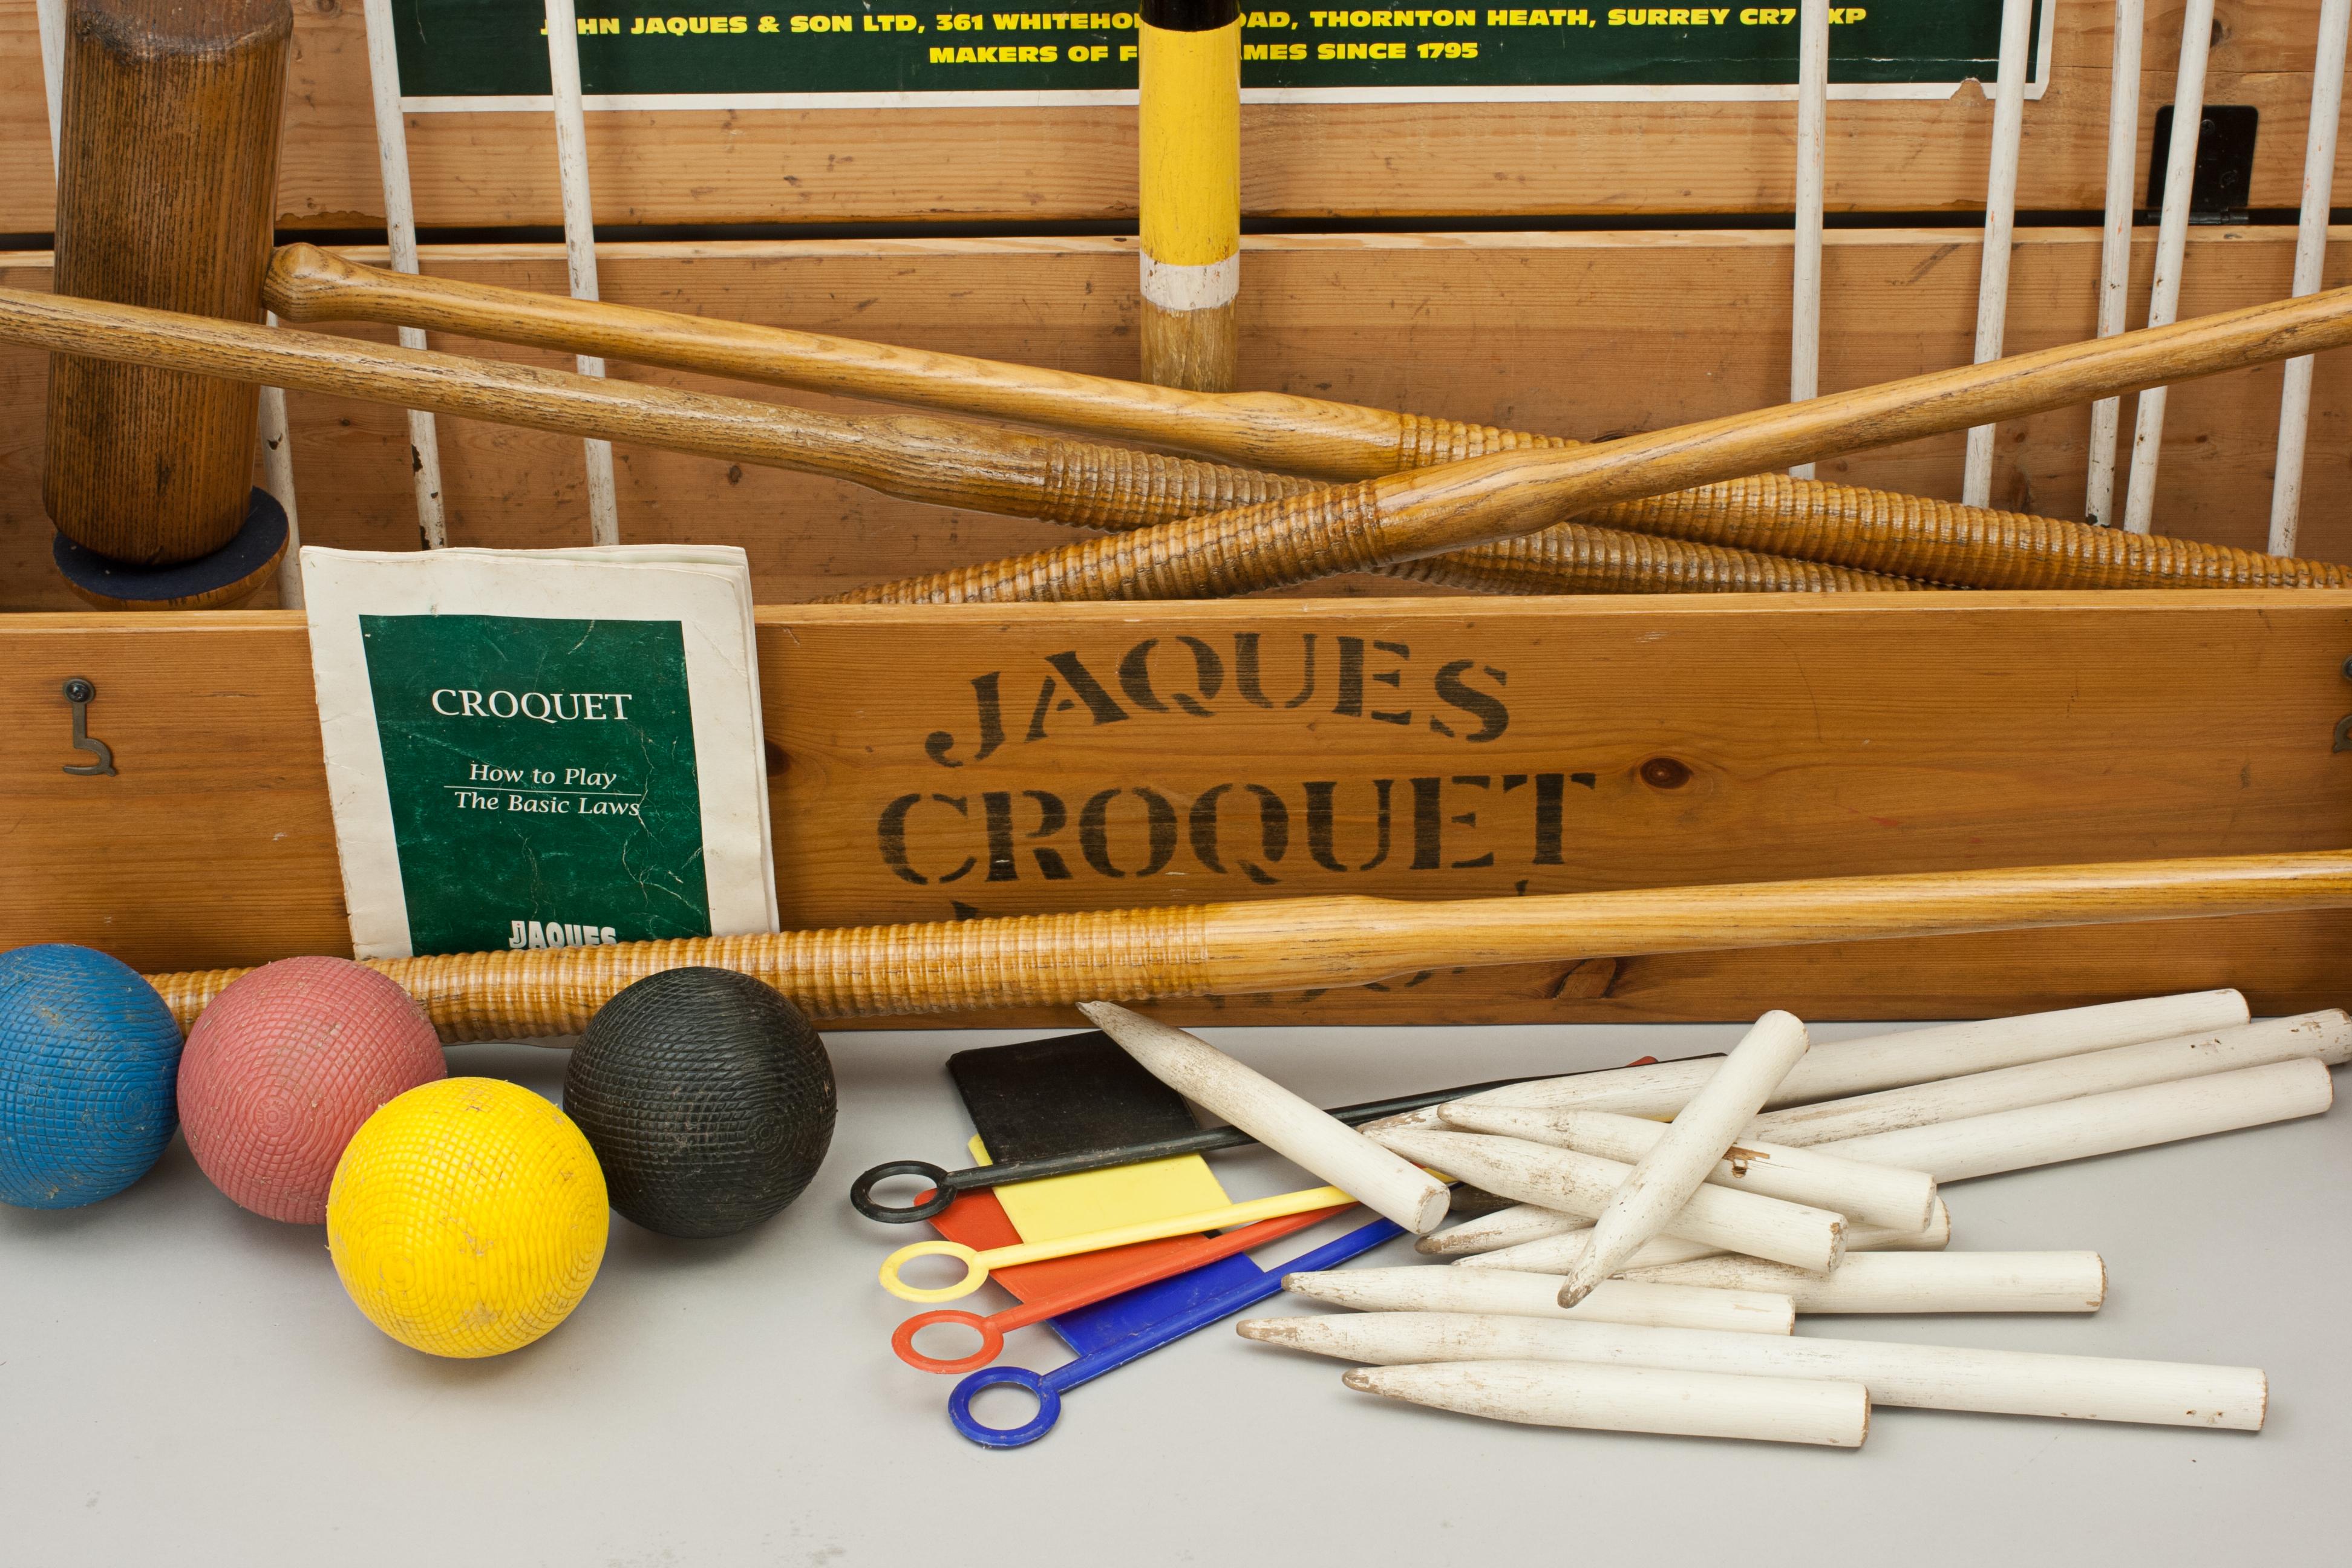 Jaques 'Corrigrip' croquet set.
A Jaques garden croquet set in original pine box with four ash mallets. To complete the set there are four coloured balls in the standard croquet colours, six bent metal hoops, 4 sprung clips, four coloured plastic